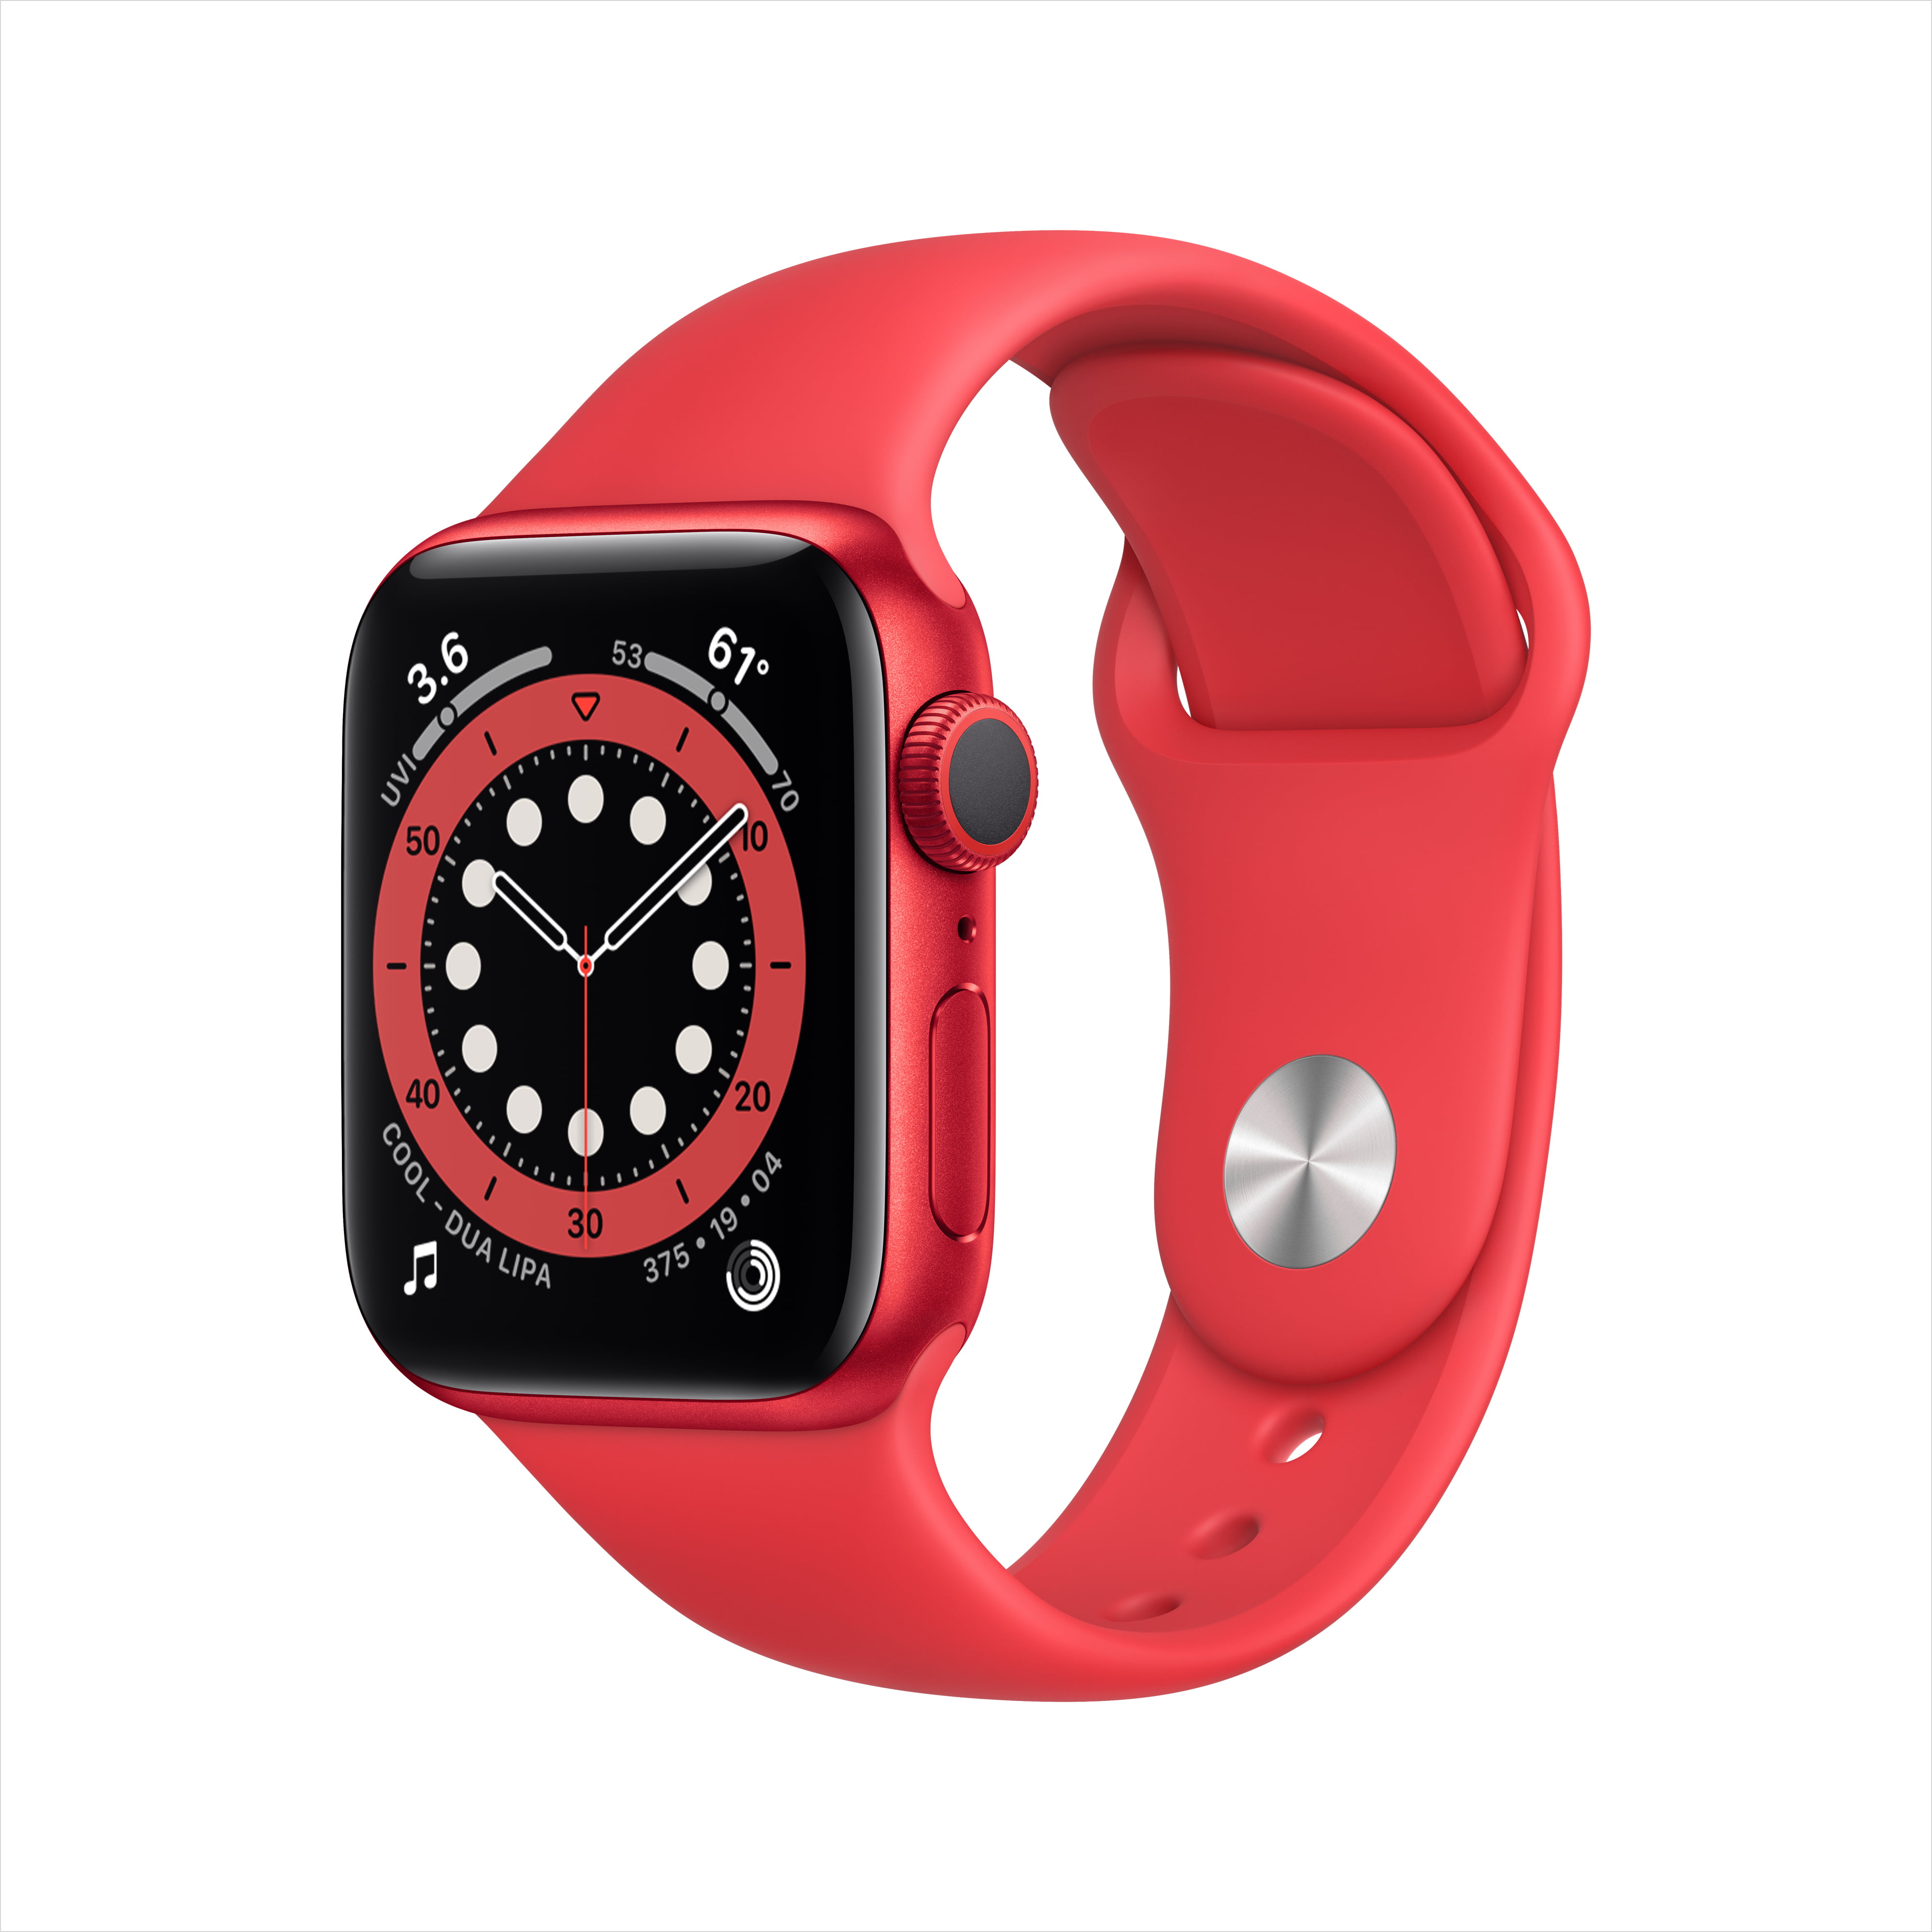 Newest Apple Watch Walmart Outlet Shop, UP TO 63% OFF | www ...